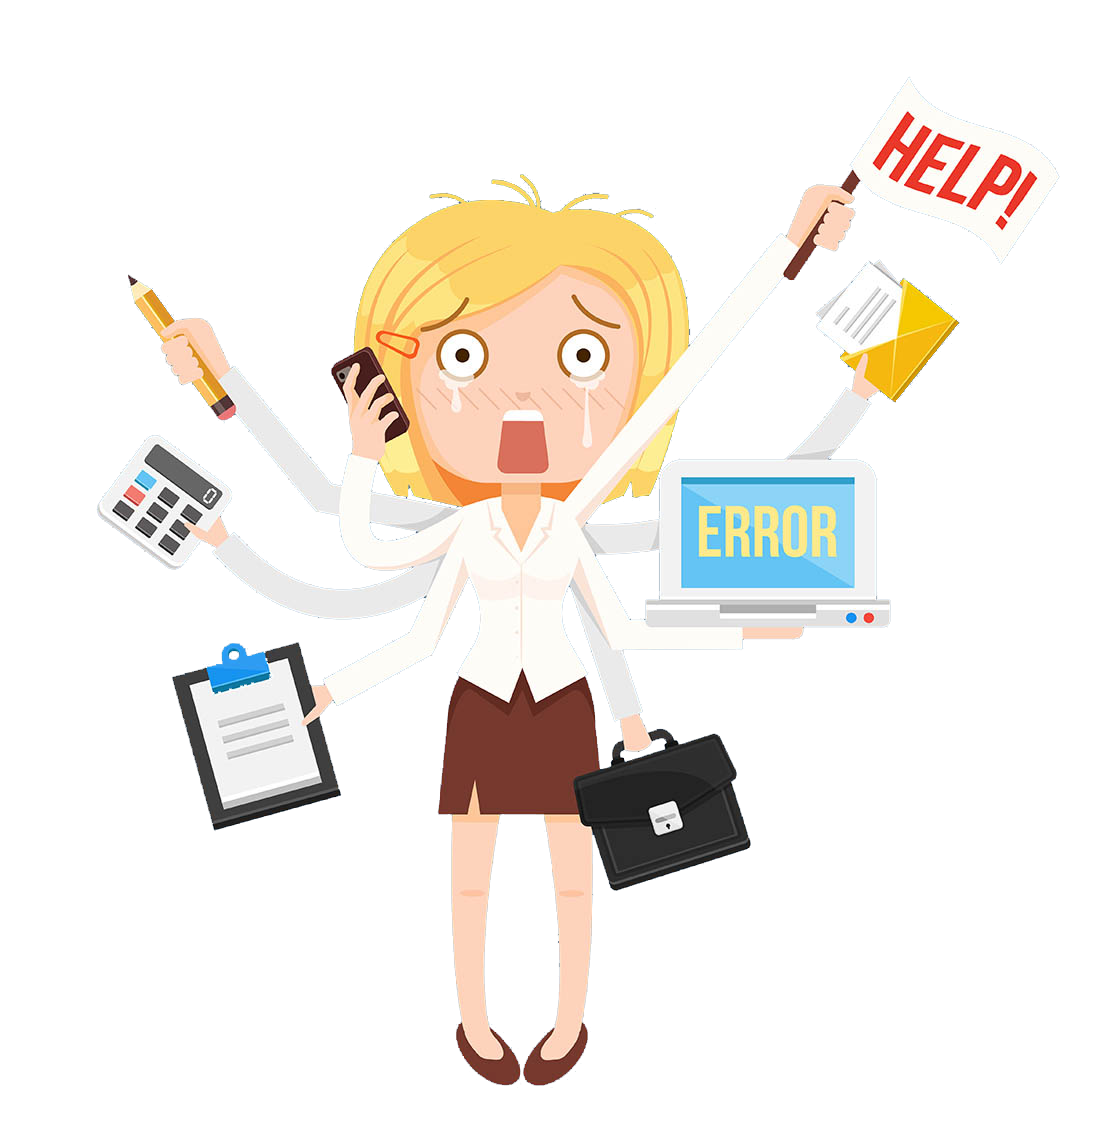 Business woman images gallery. Businesswoman clipart busy